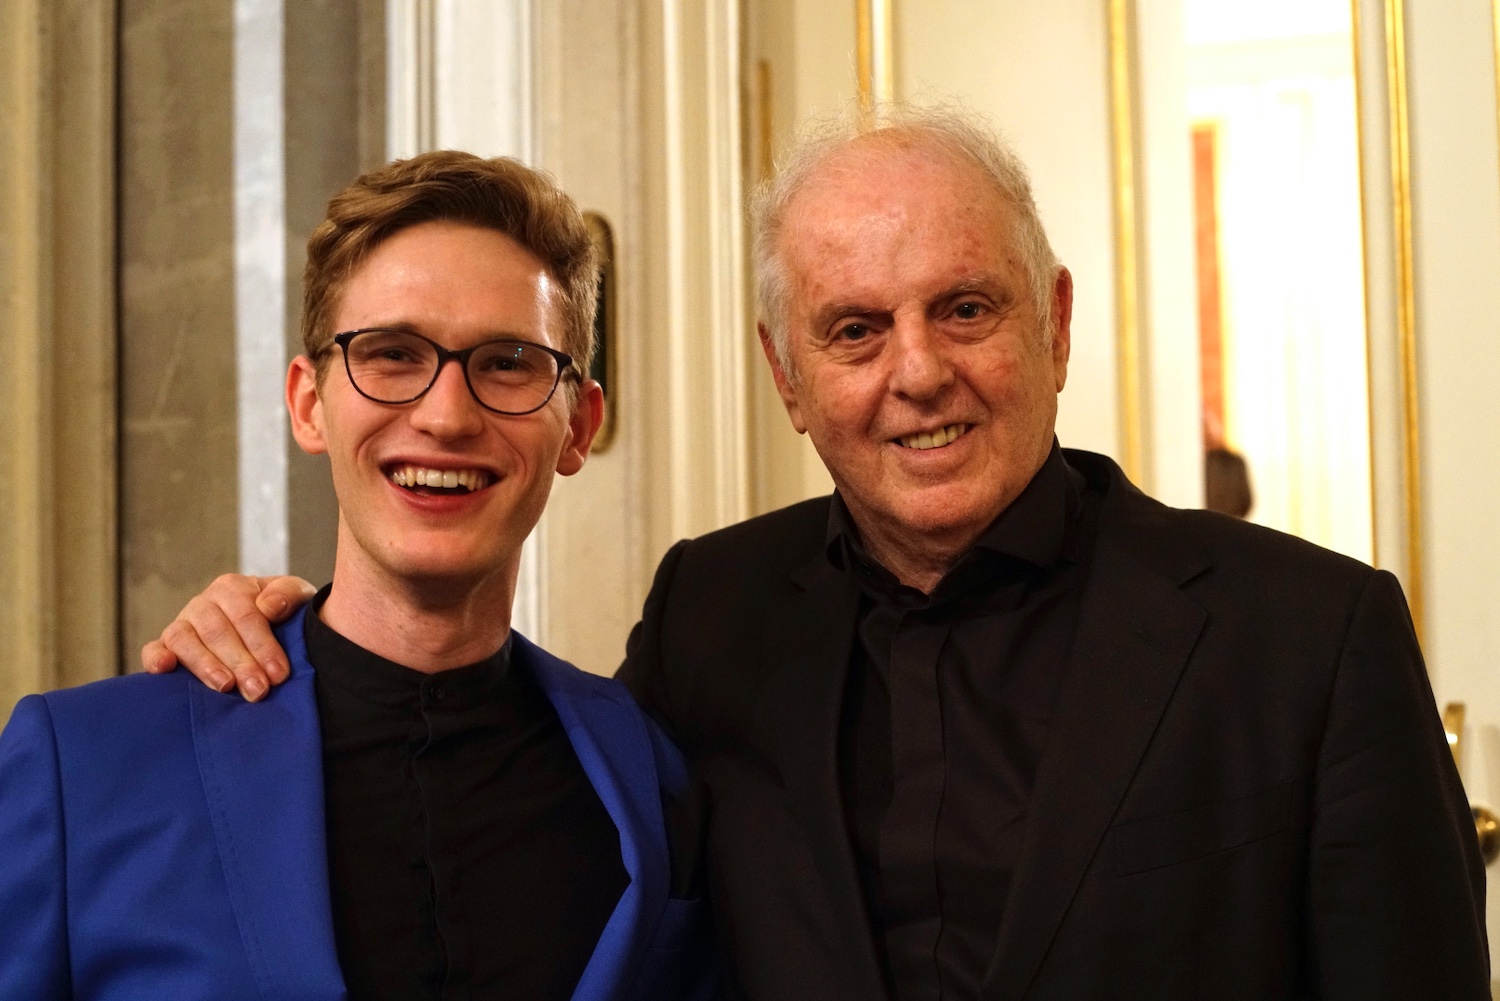 Rising conductor Thomas Guggeis takes over West-Eastern Divan tour from ailing Daniel Barenboim 